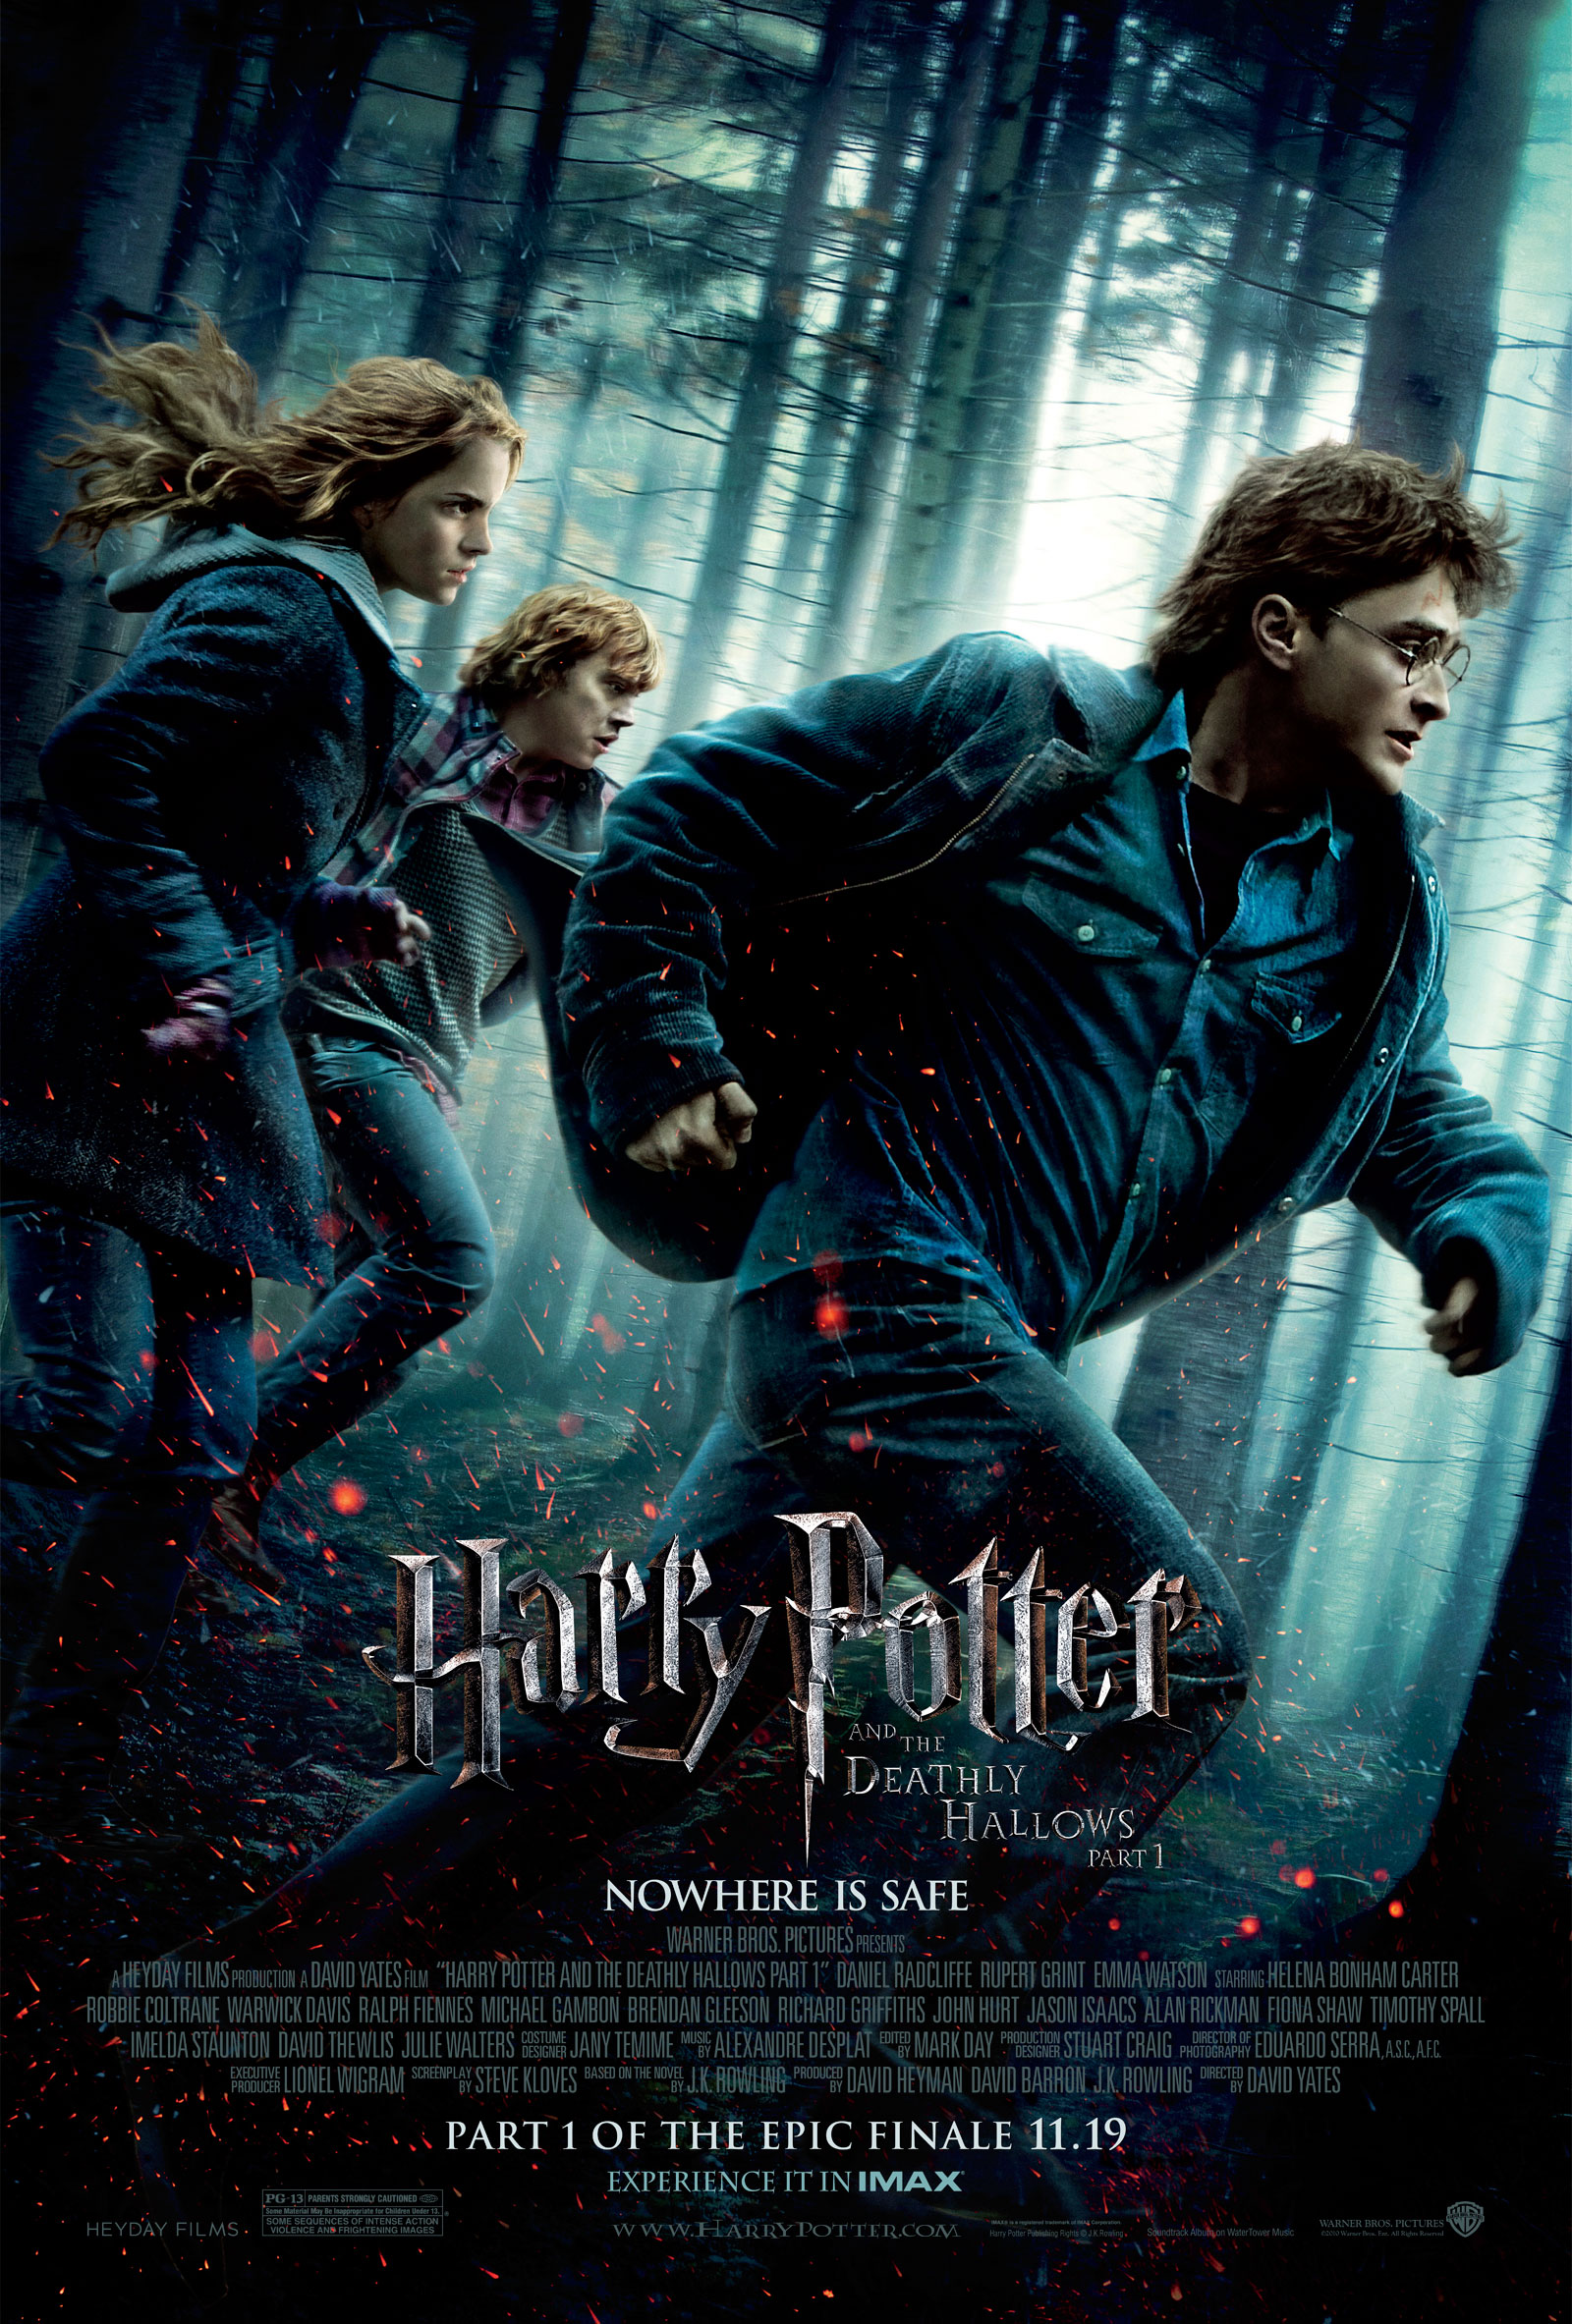 Harry Potter And The Deathly Hallows Movie Poster Desktop Wallpaper